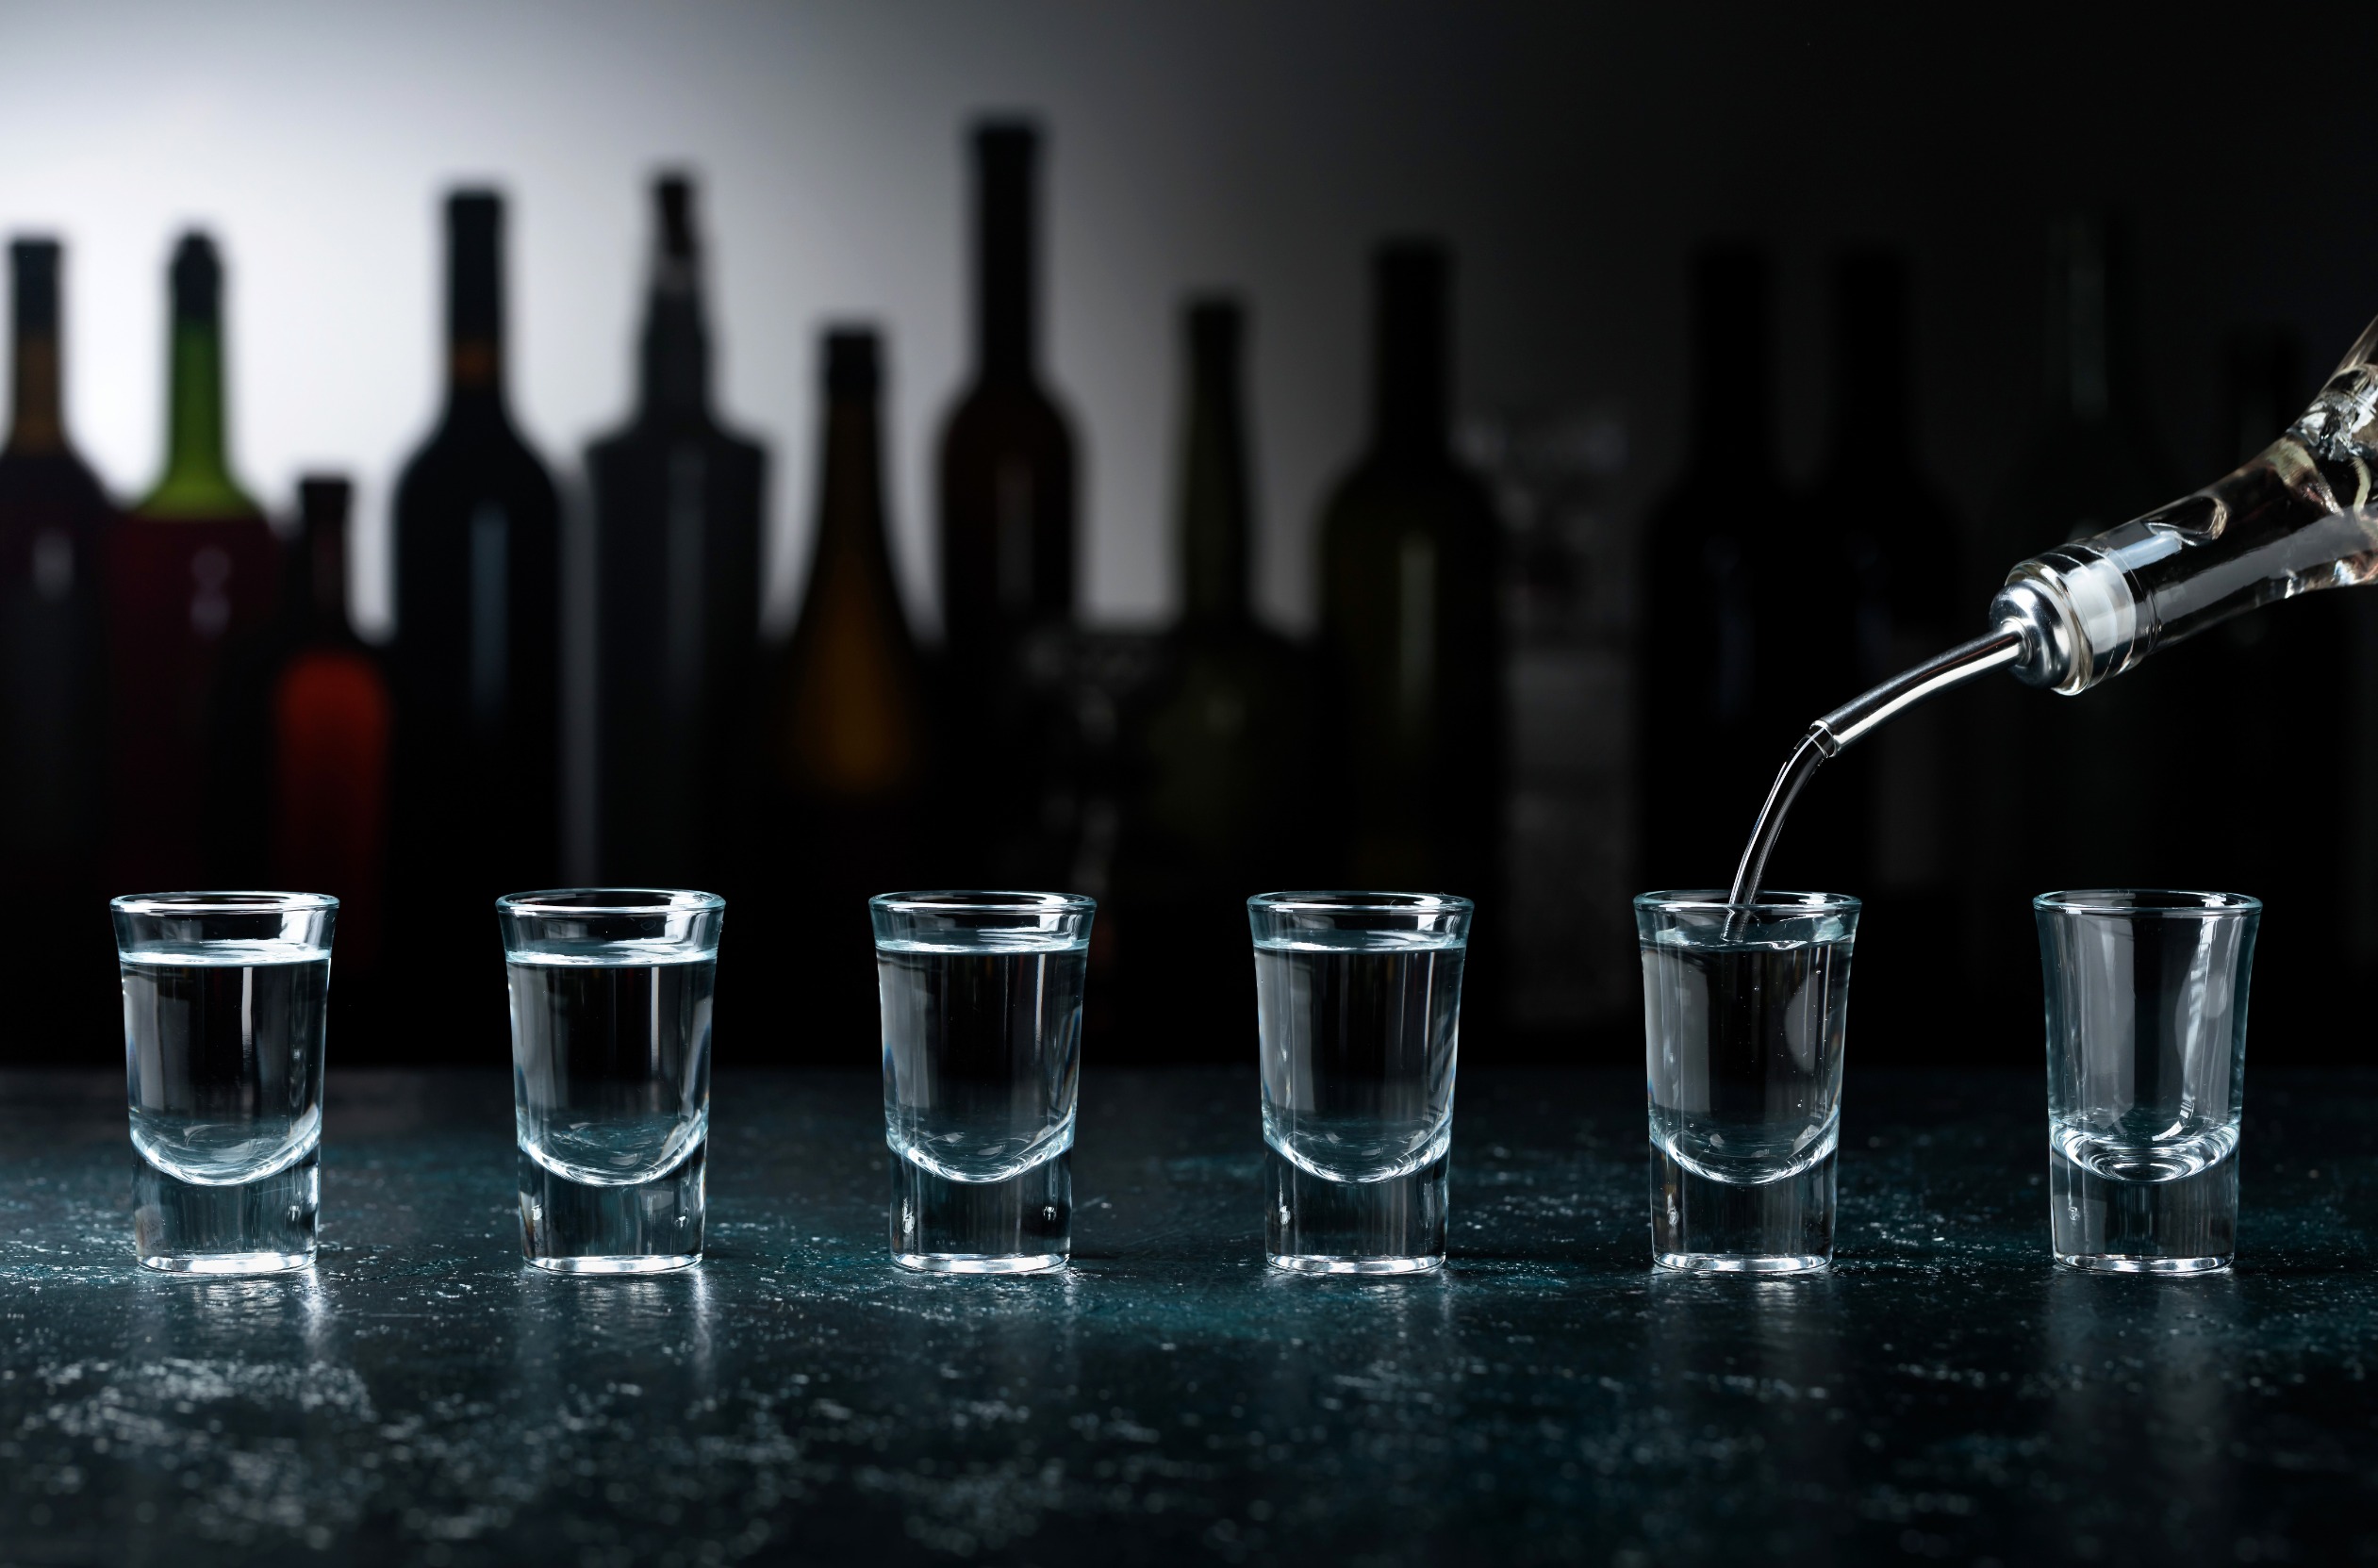 Bottle of spirit being poured into six shot glasses on bar